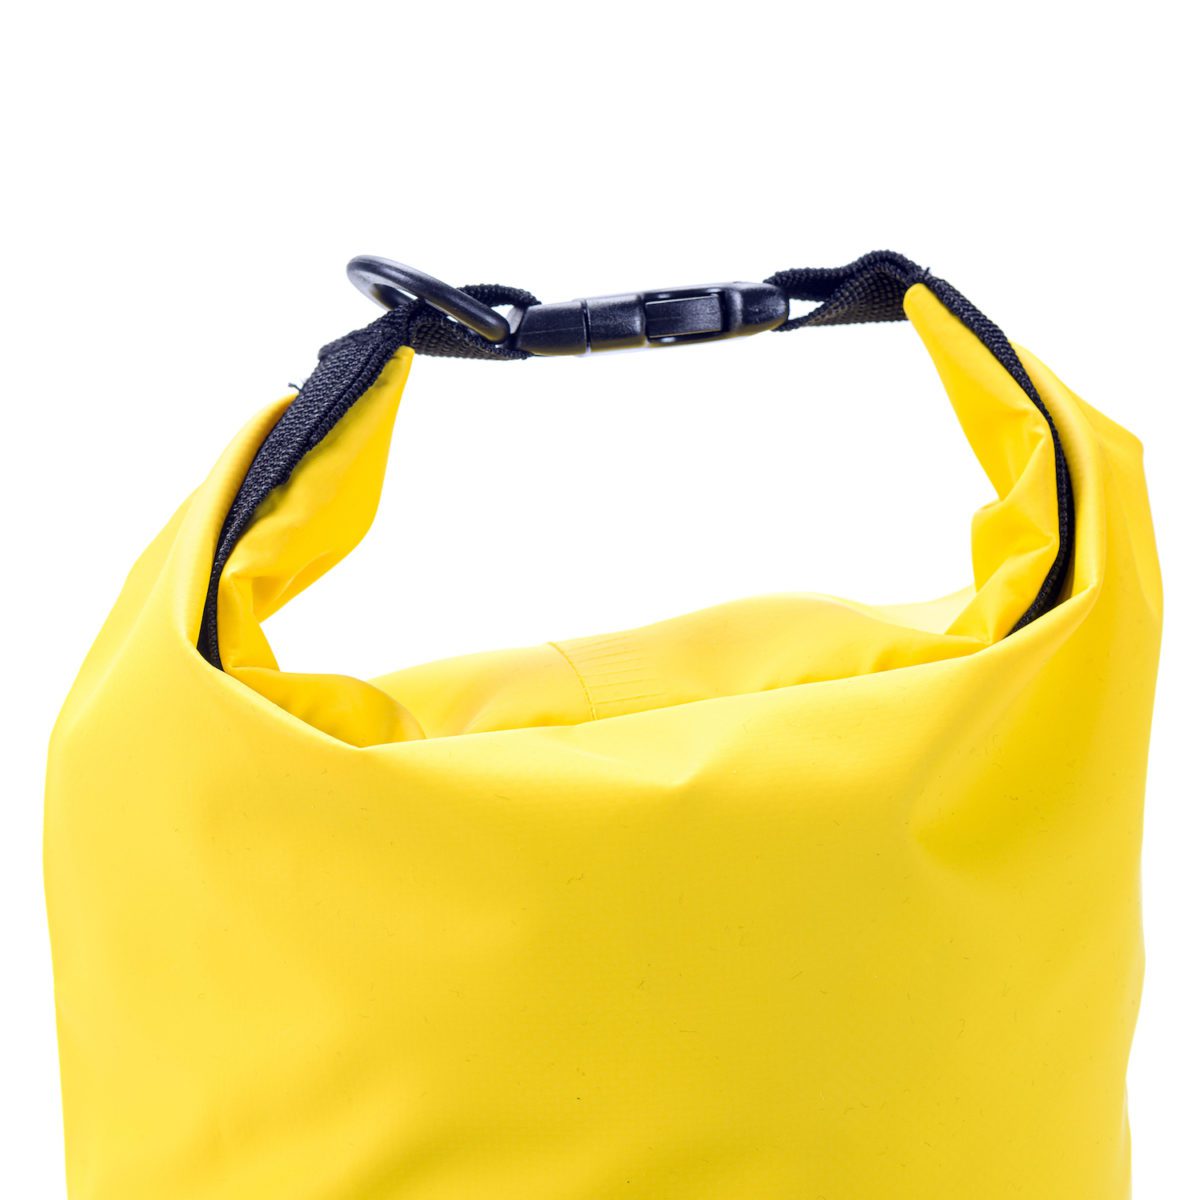 Rebelcell Dry Bag small (5L) product image